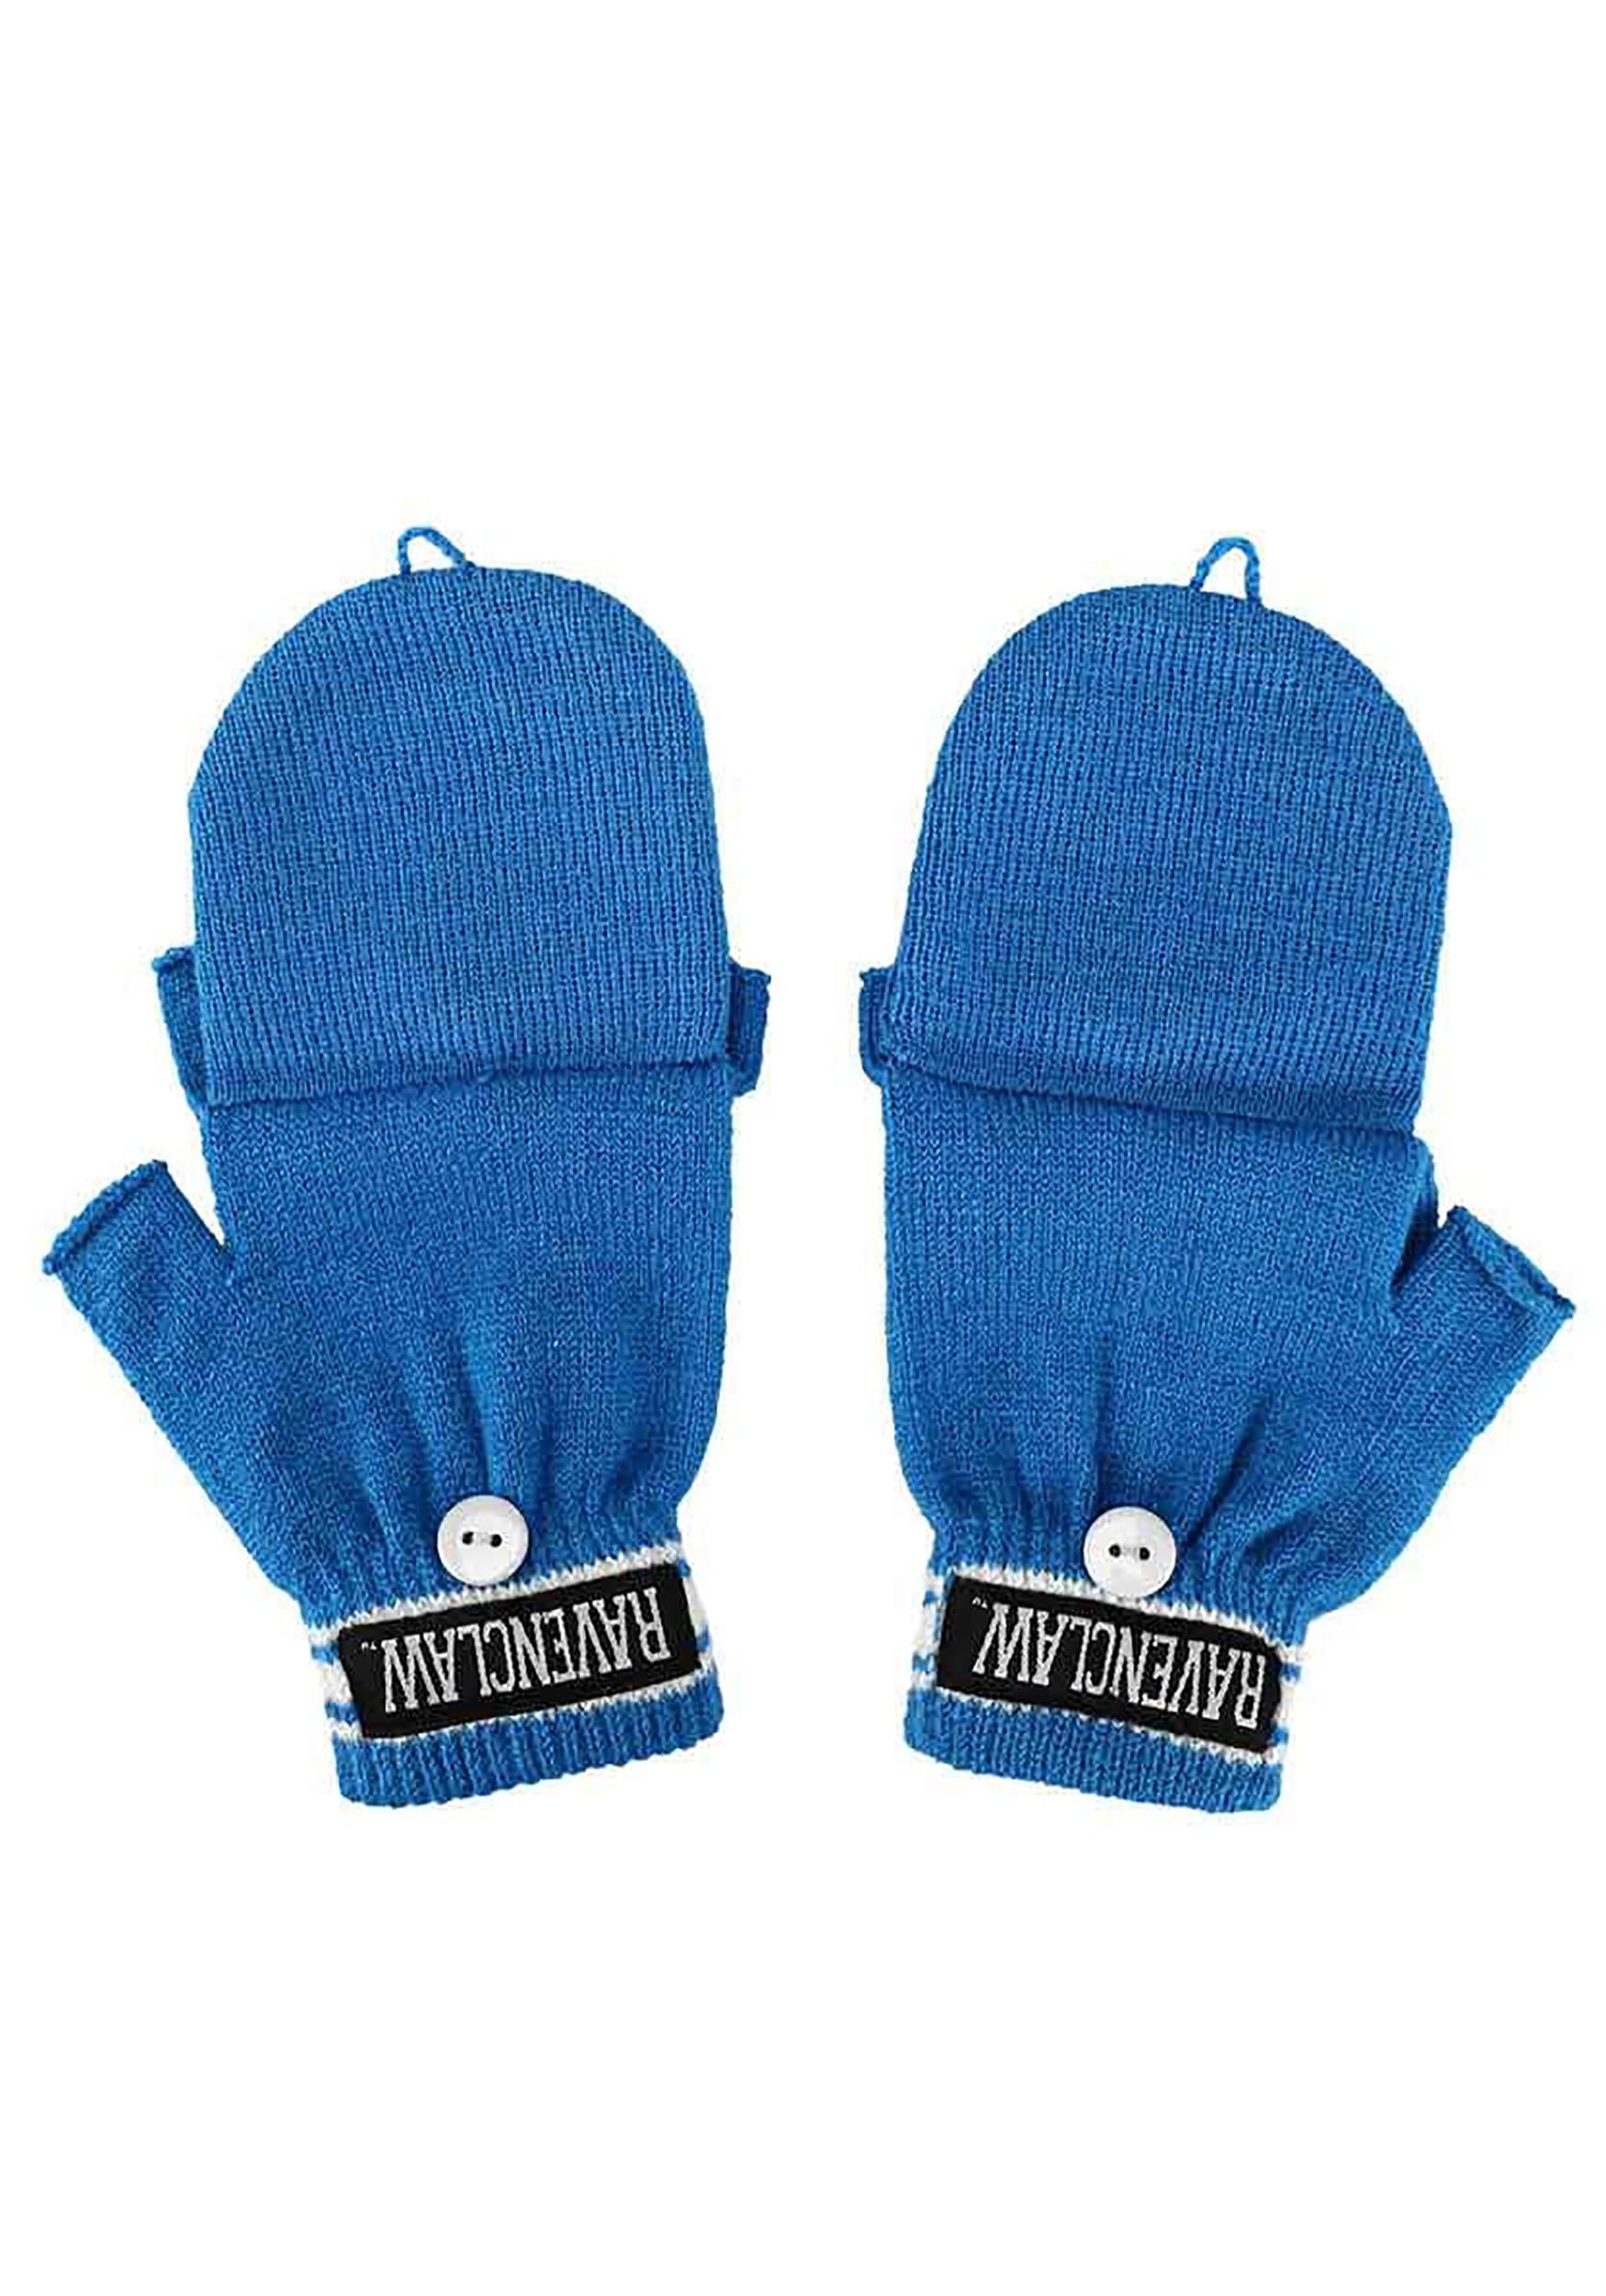 Ravenclaw Harry Potter Beanie & Fingerless Gloves With Mitten Flap Set